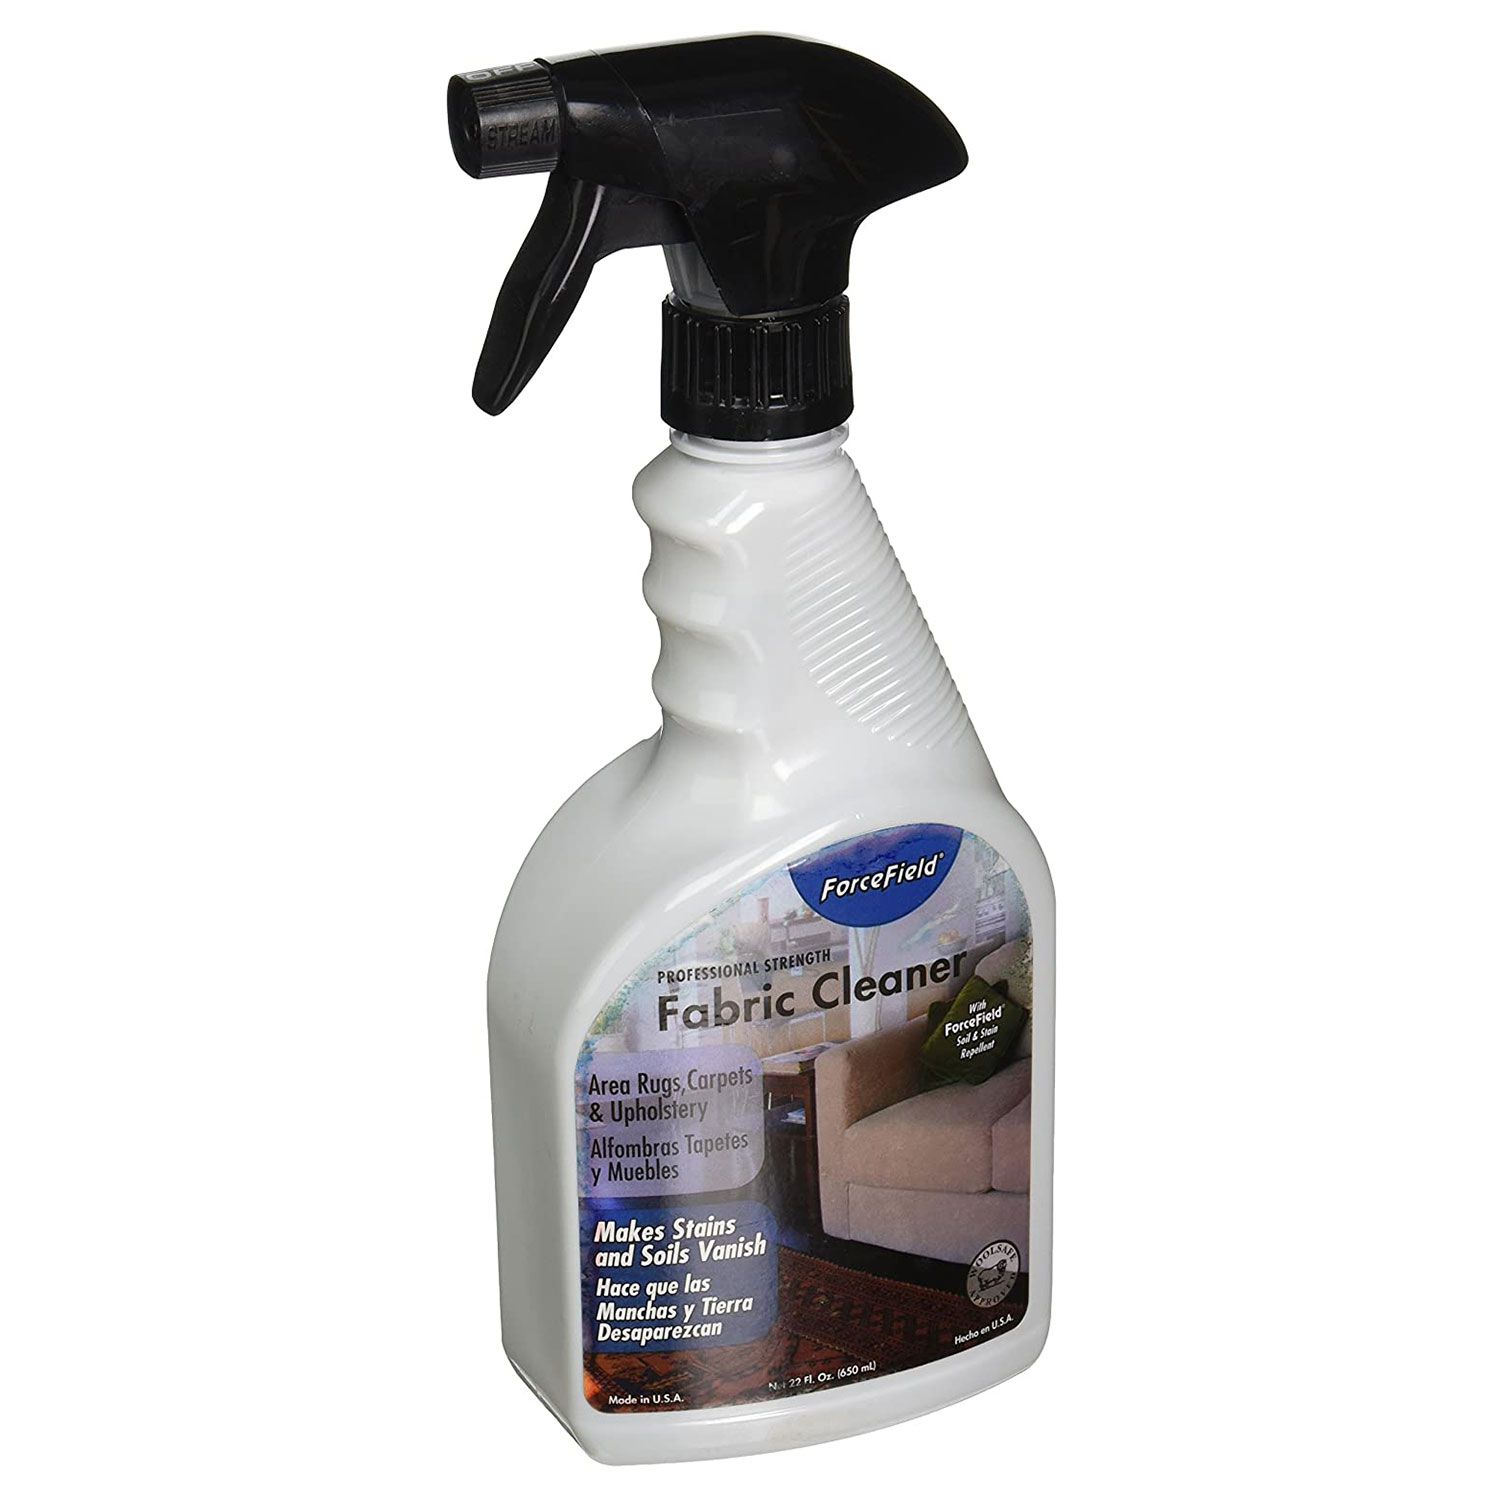 Fabric Cleaner Remove, Protect and Deep Clean